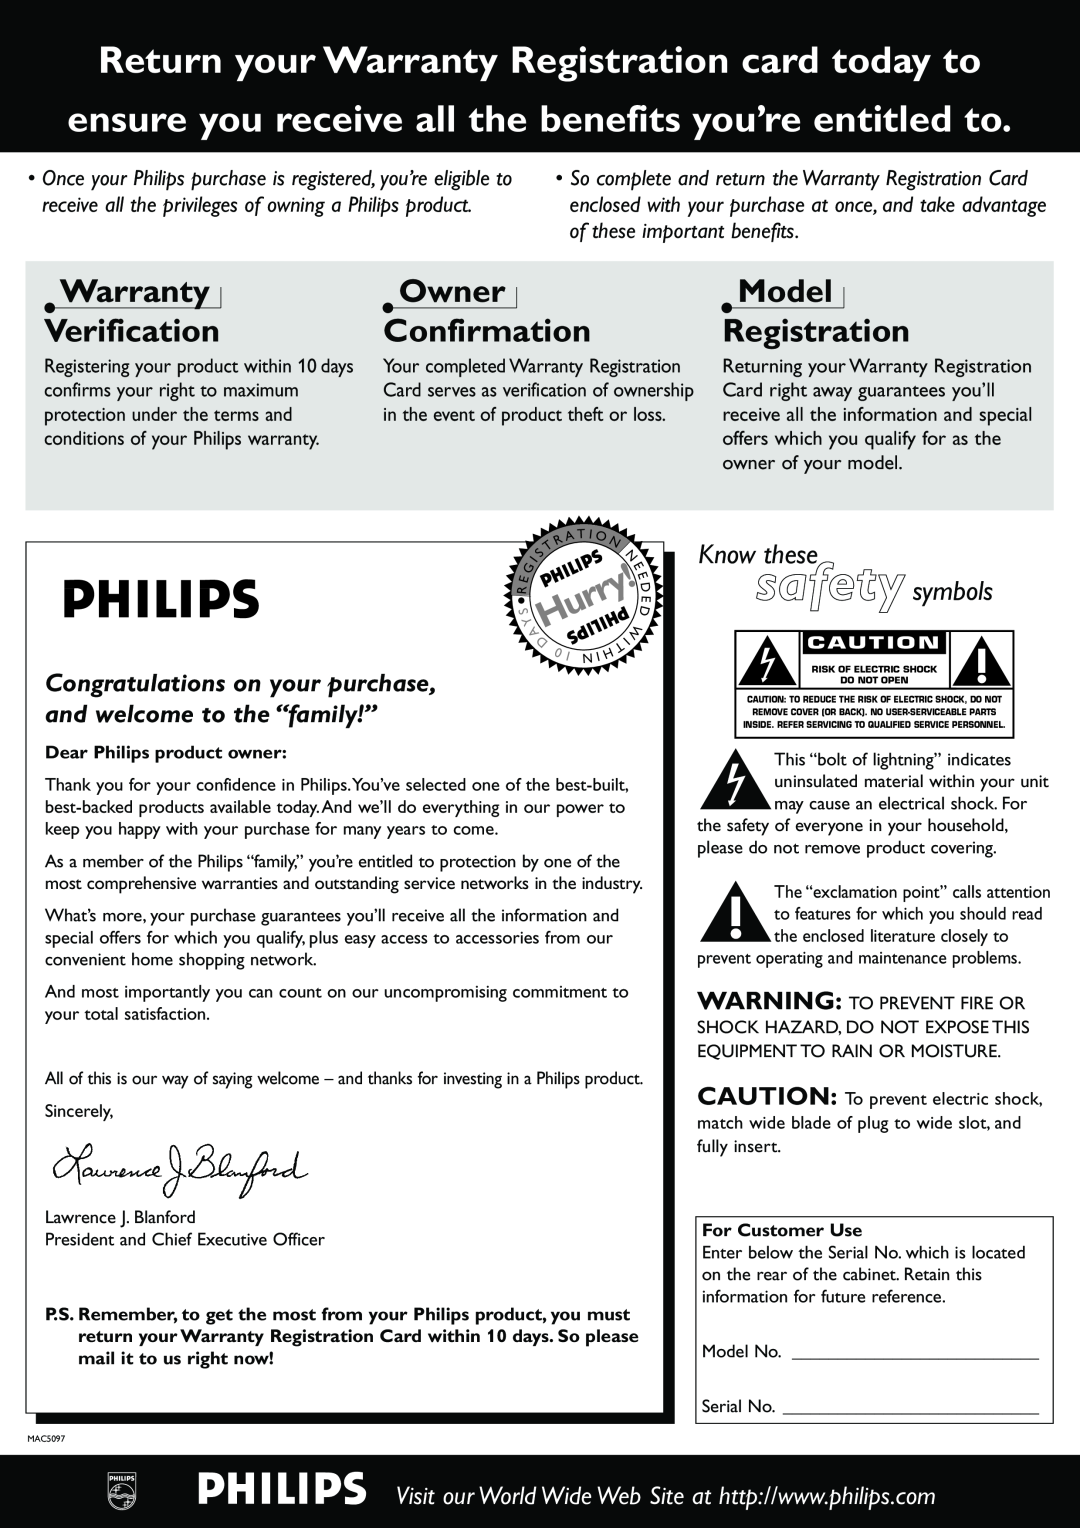 Philips MX3660D Congratulations on your purchase, and welcome to the “family!”, Warranty Verification, Owner Confirmation 